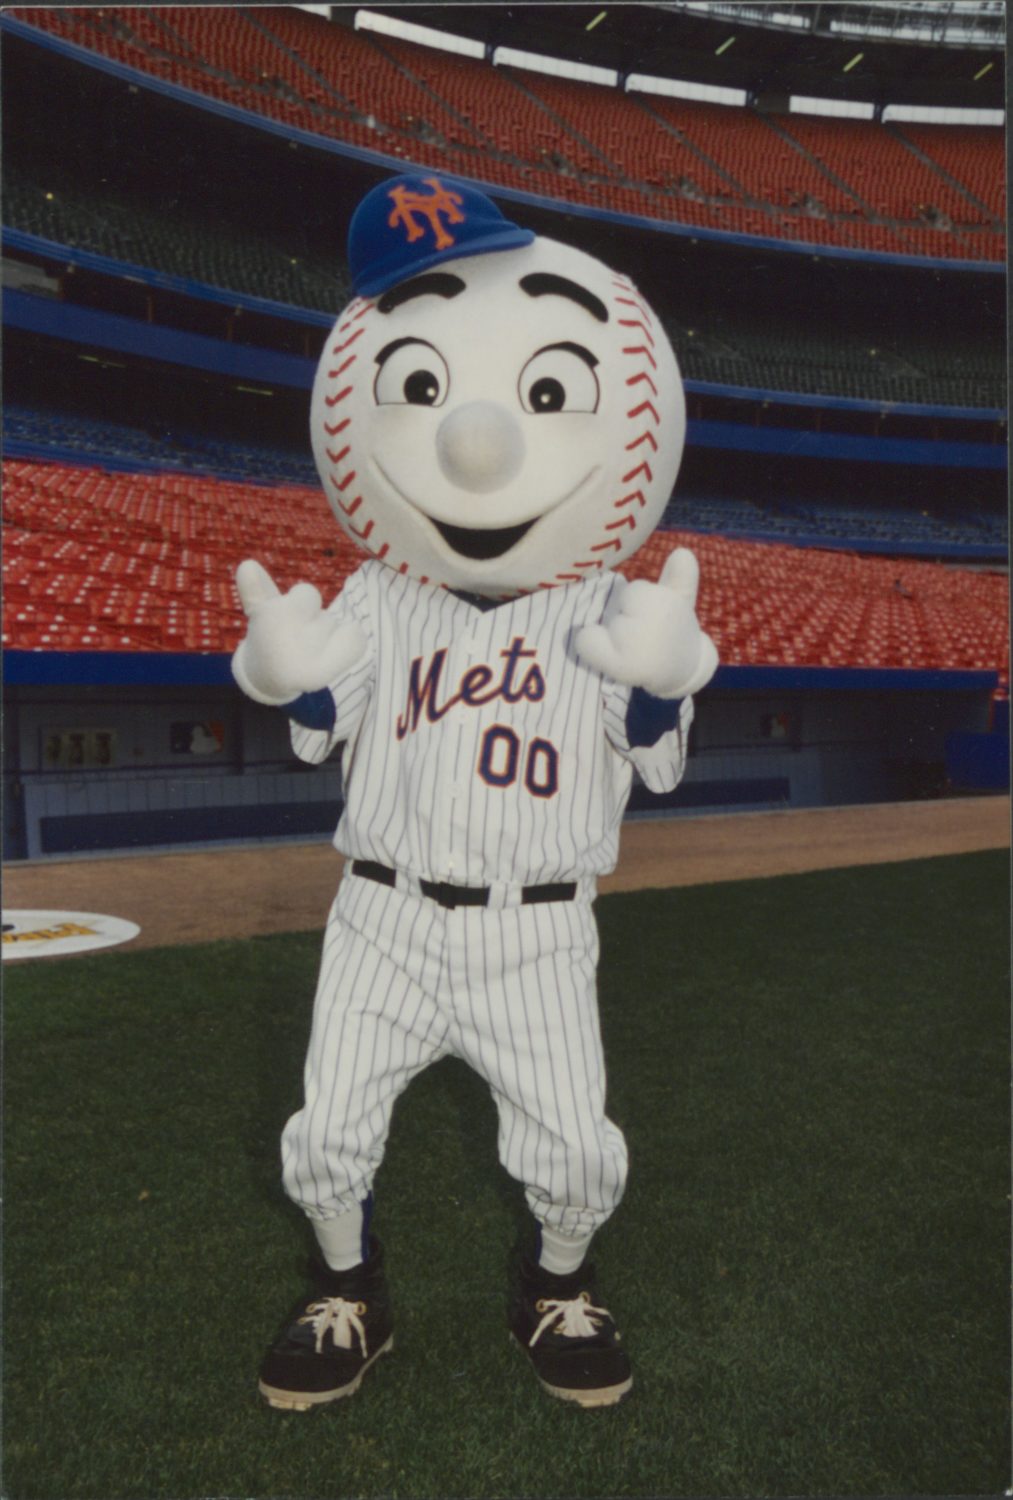 Mr. Met Gives Two Thumbs Up